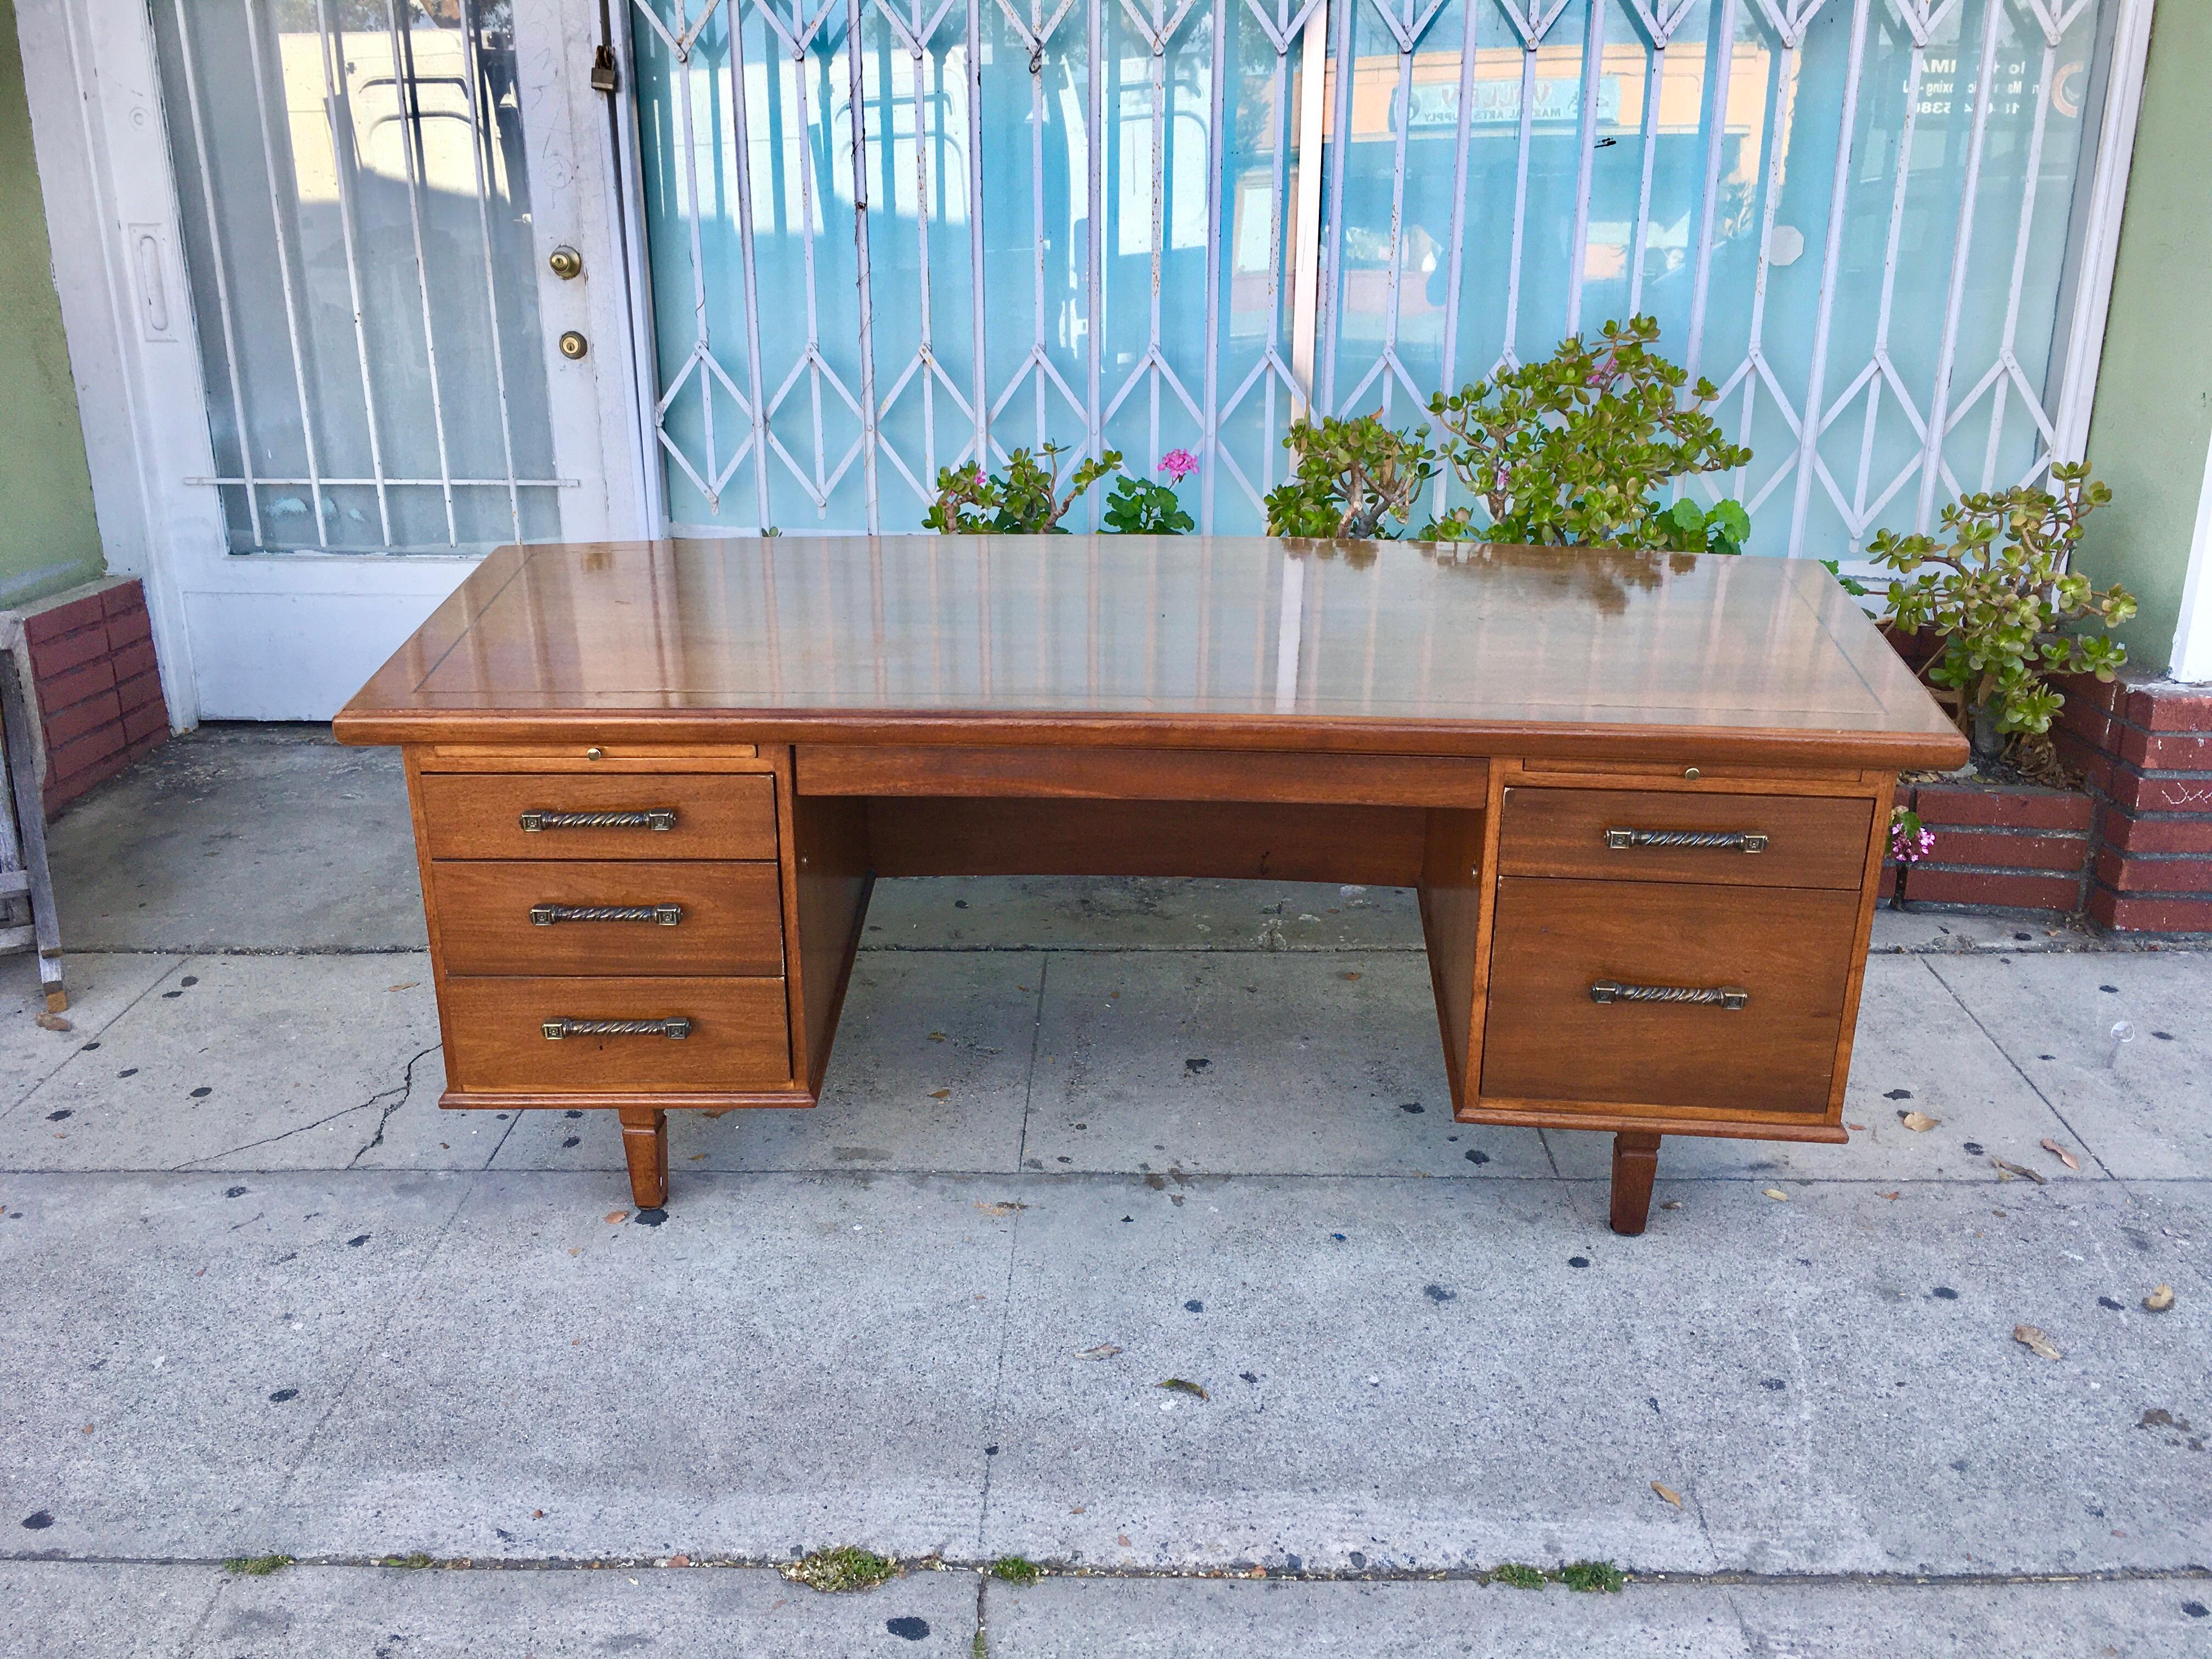 Beautiful executive walnut desk by Monteverdi young. This executive desk features an excellent walnut finish with four drawers and a file drawer. Each has an aesthetically constructed handle, giving it that perfect mid-century style.